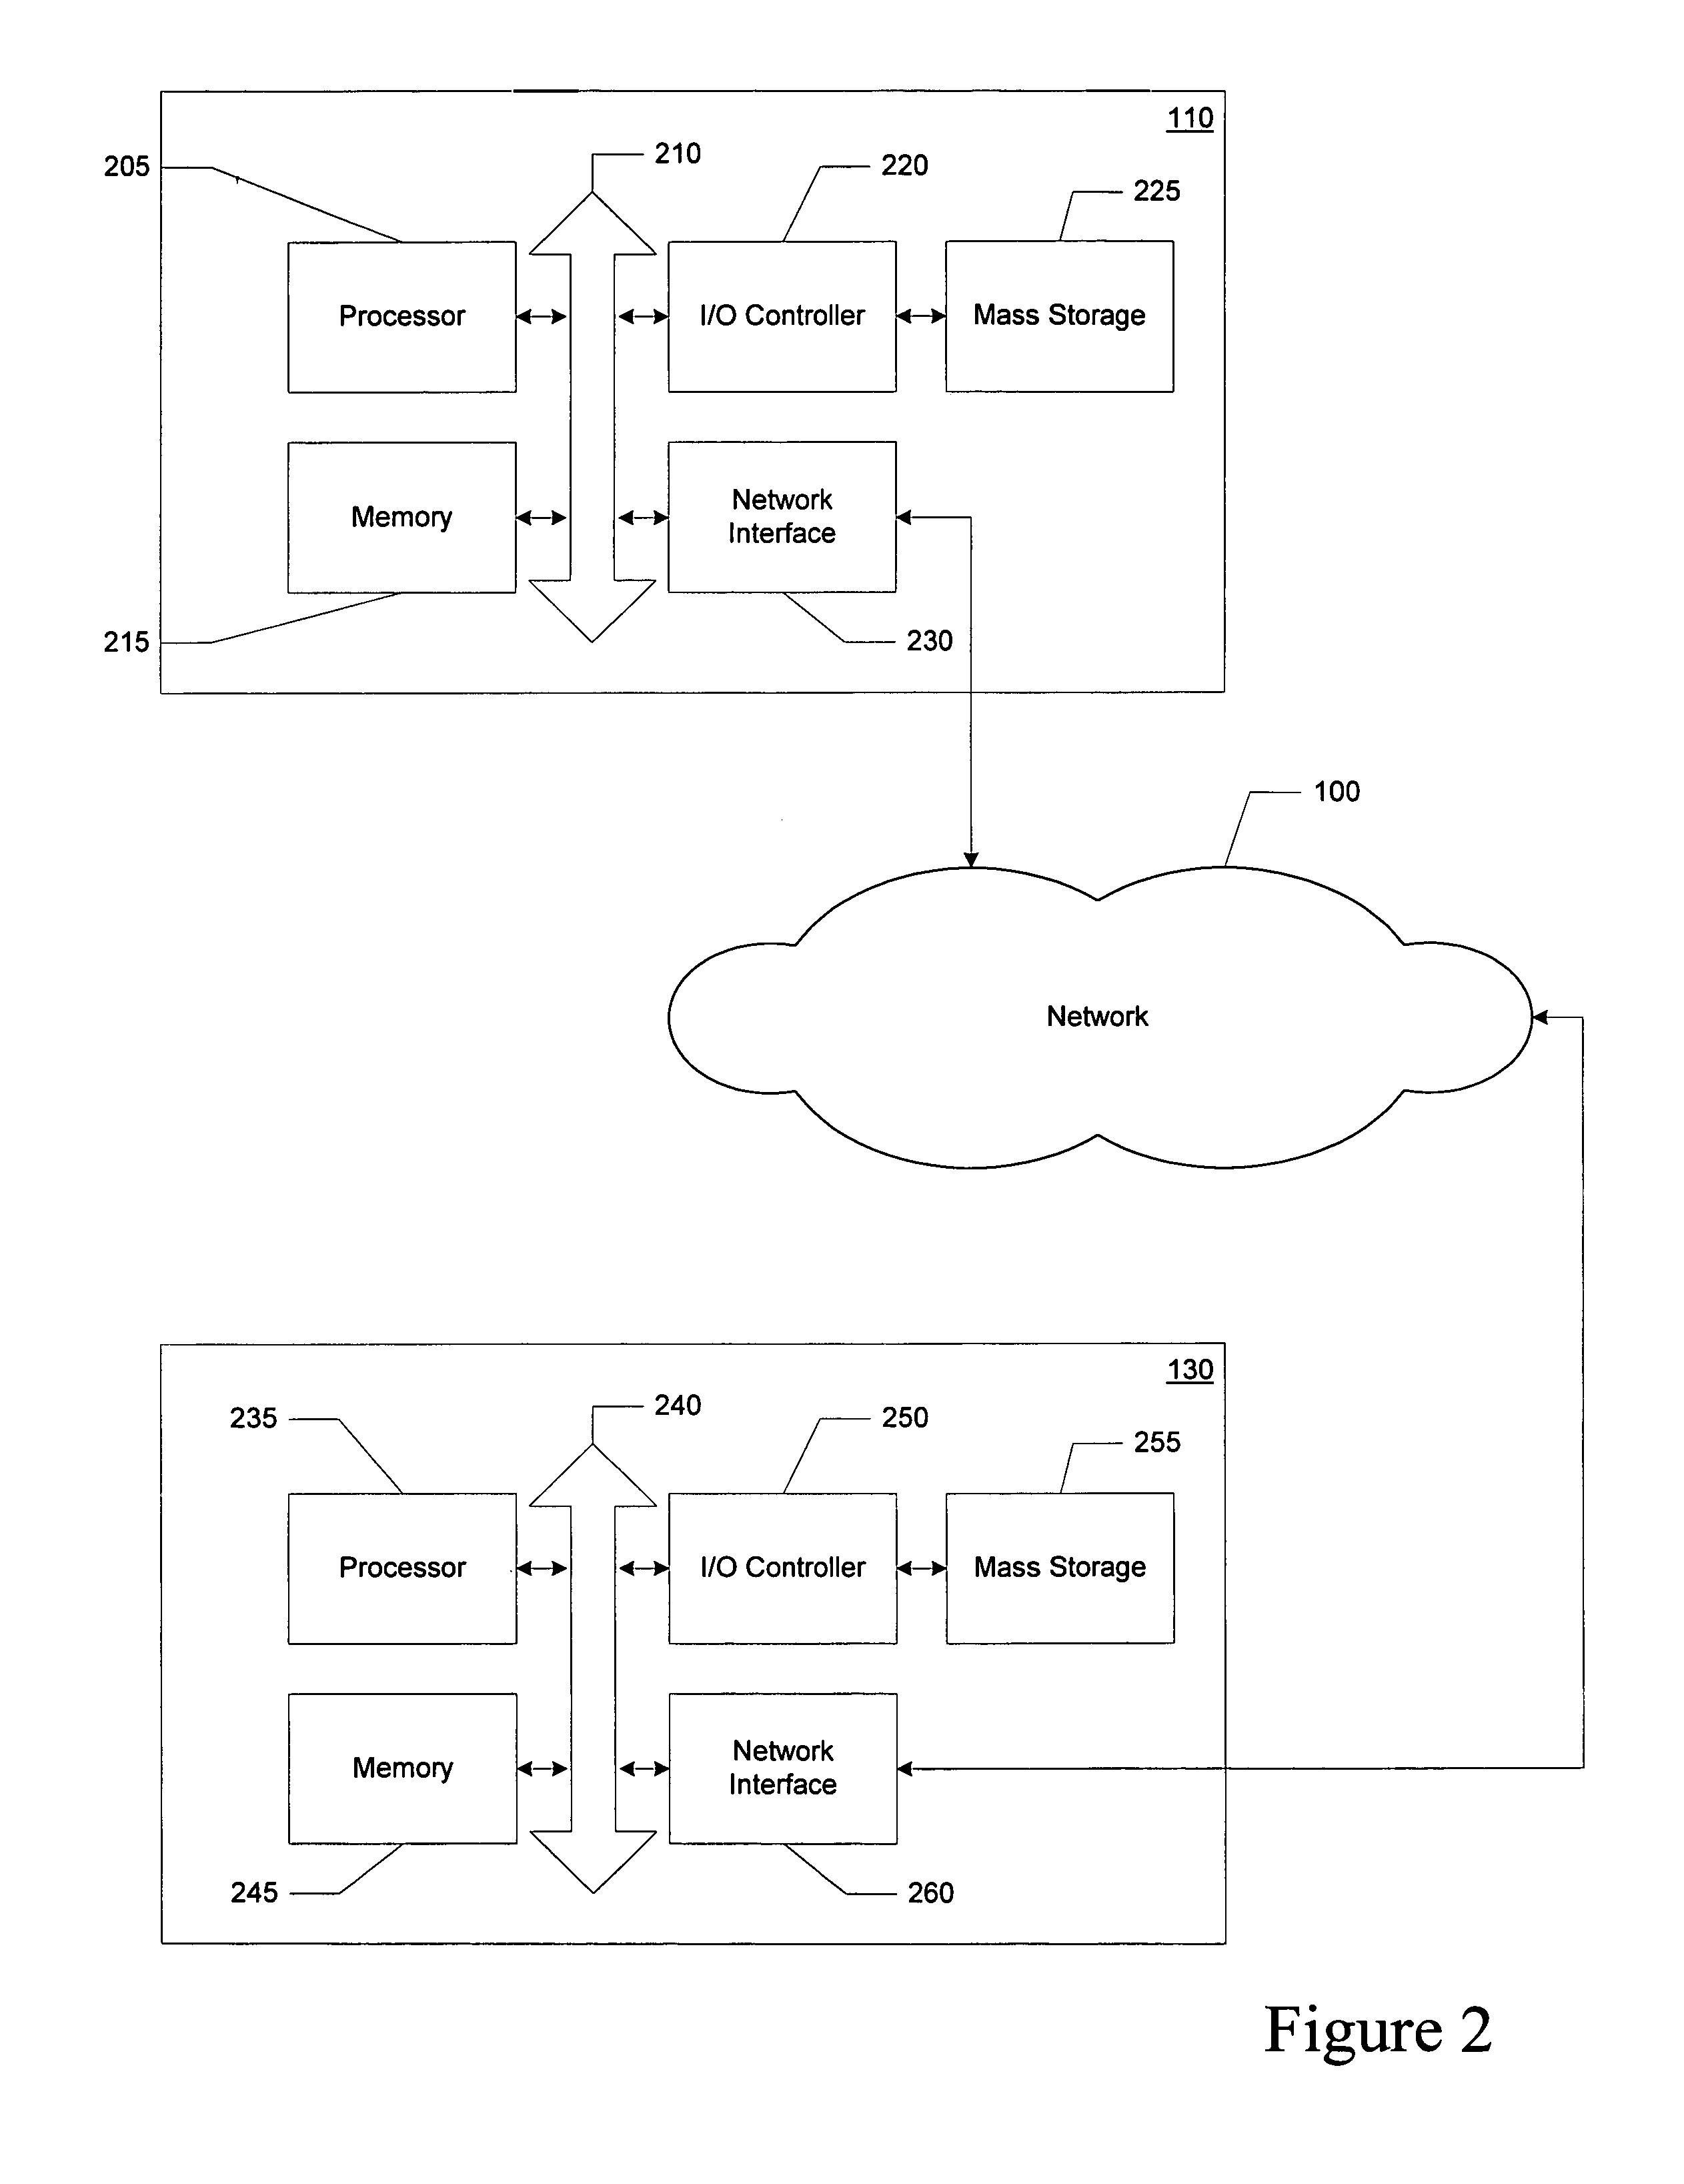 Providing evaluation and processing of line items